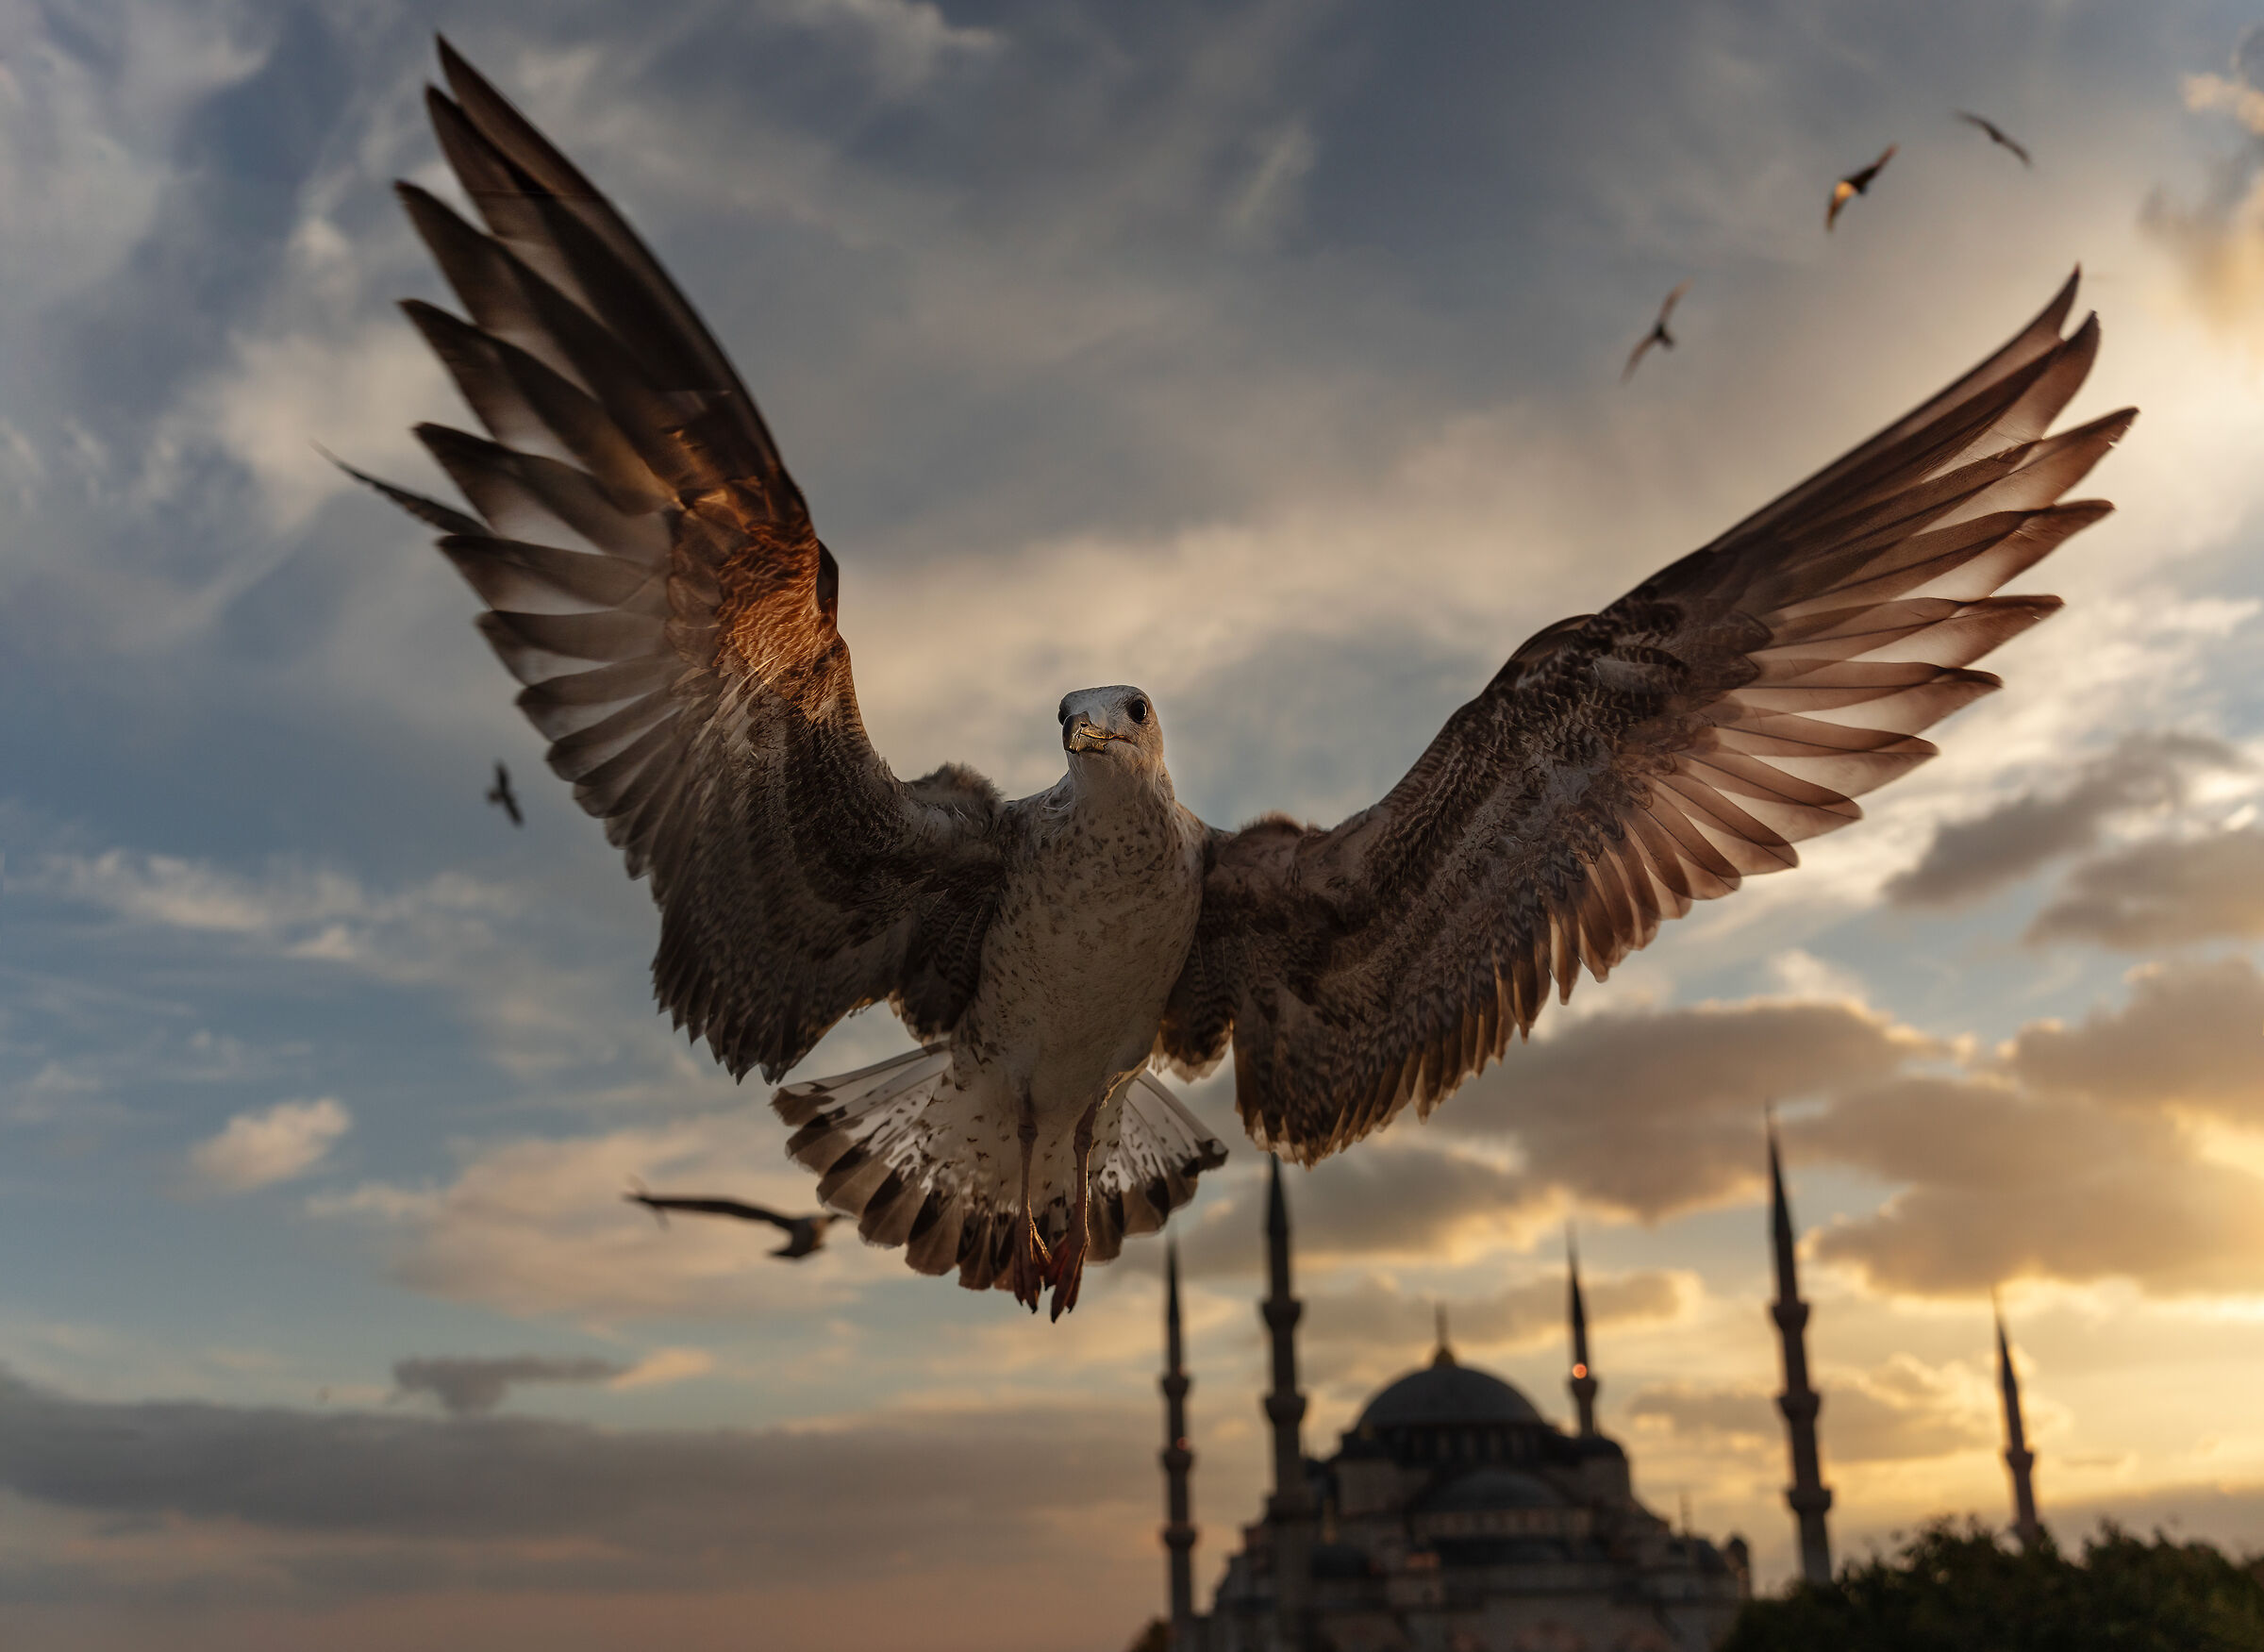 The Seagull and the Mosque ...